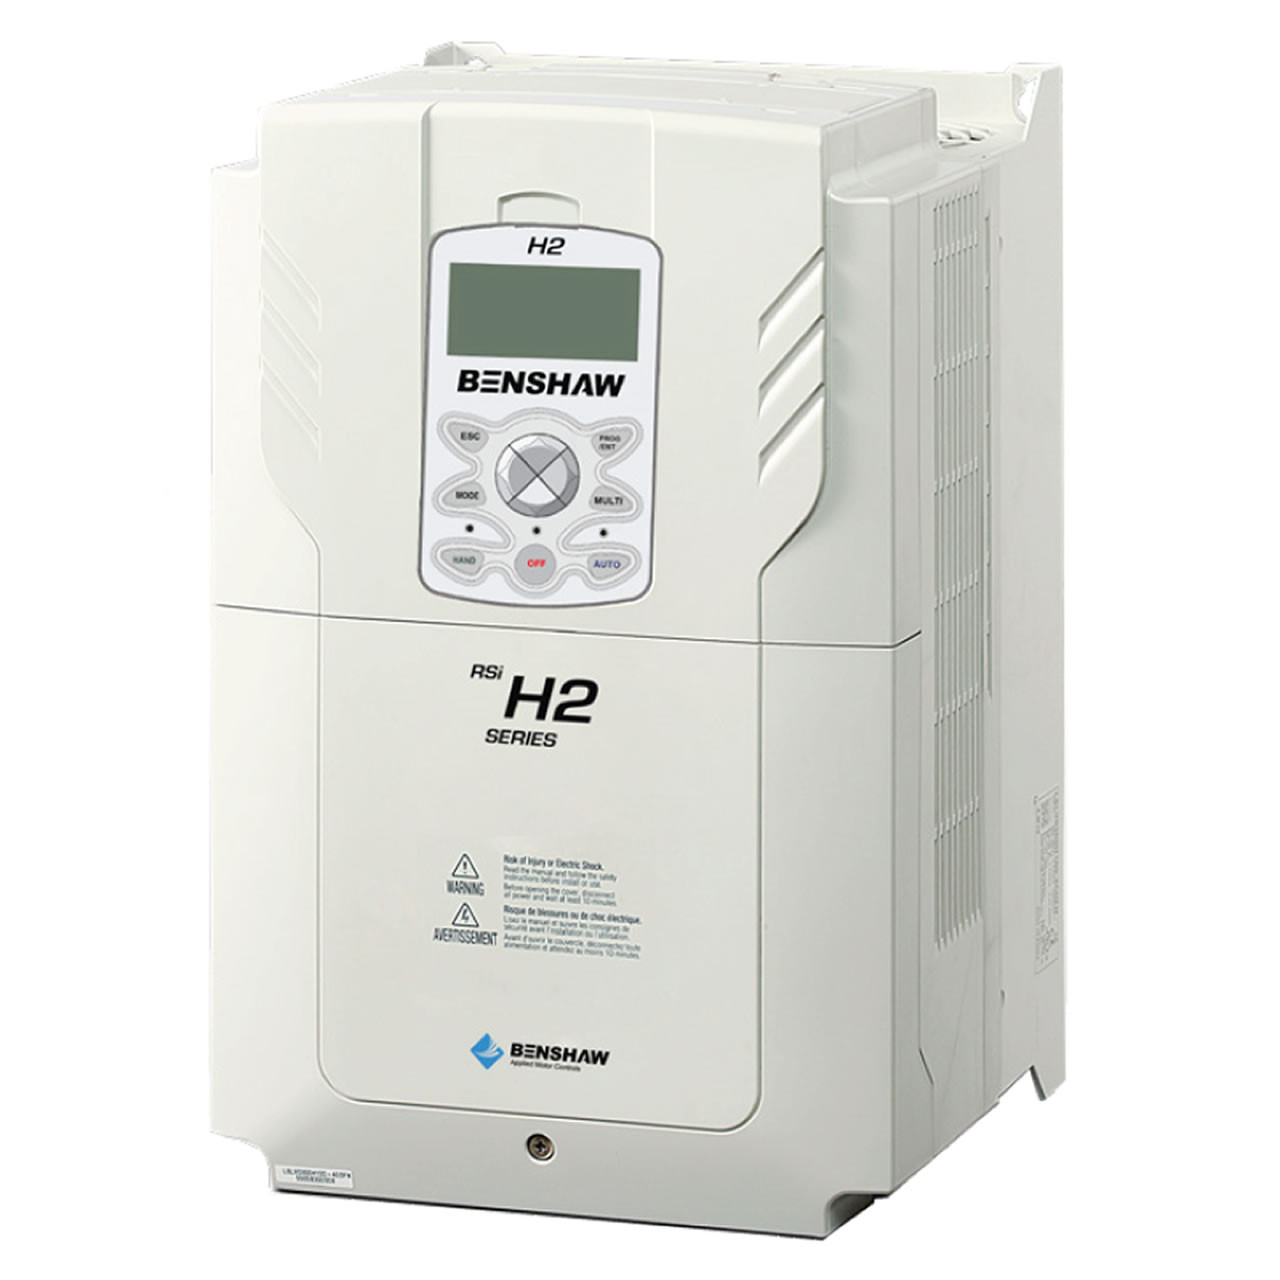 Benshaw RSI-007-H2-2C variable frequency drive